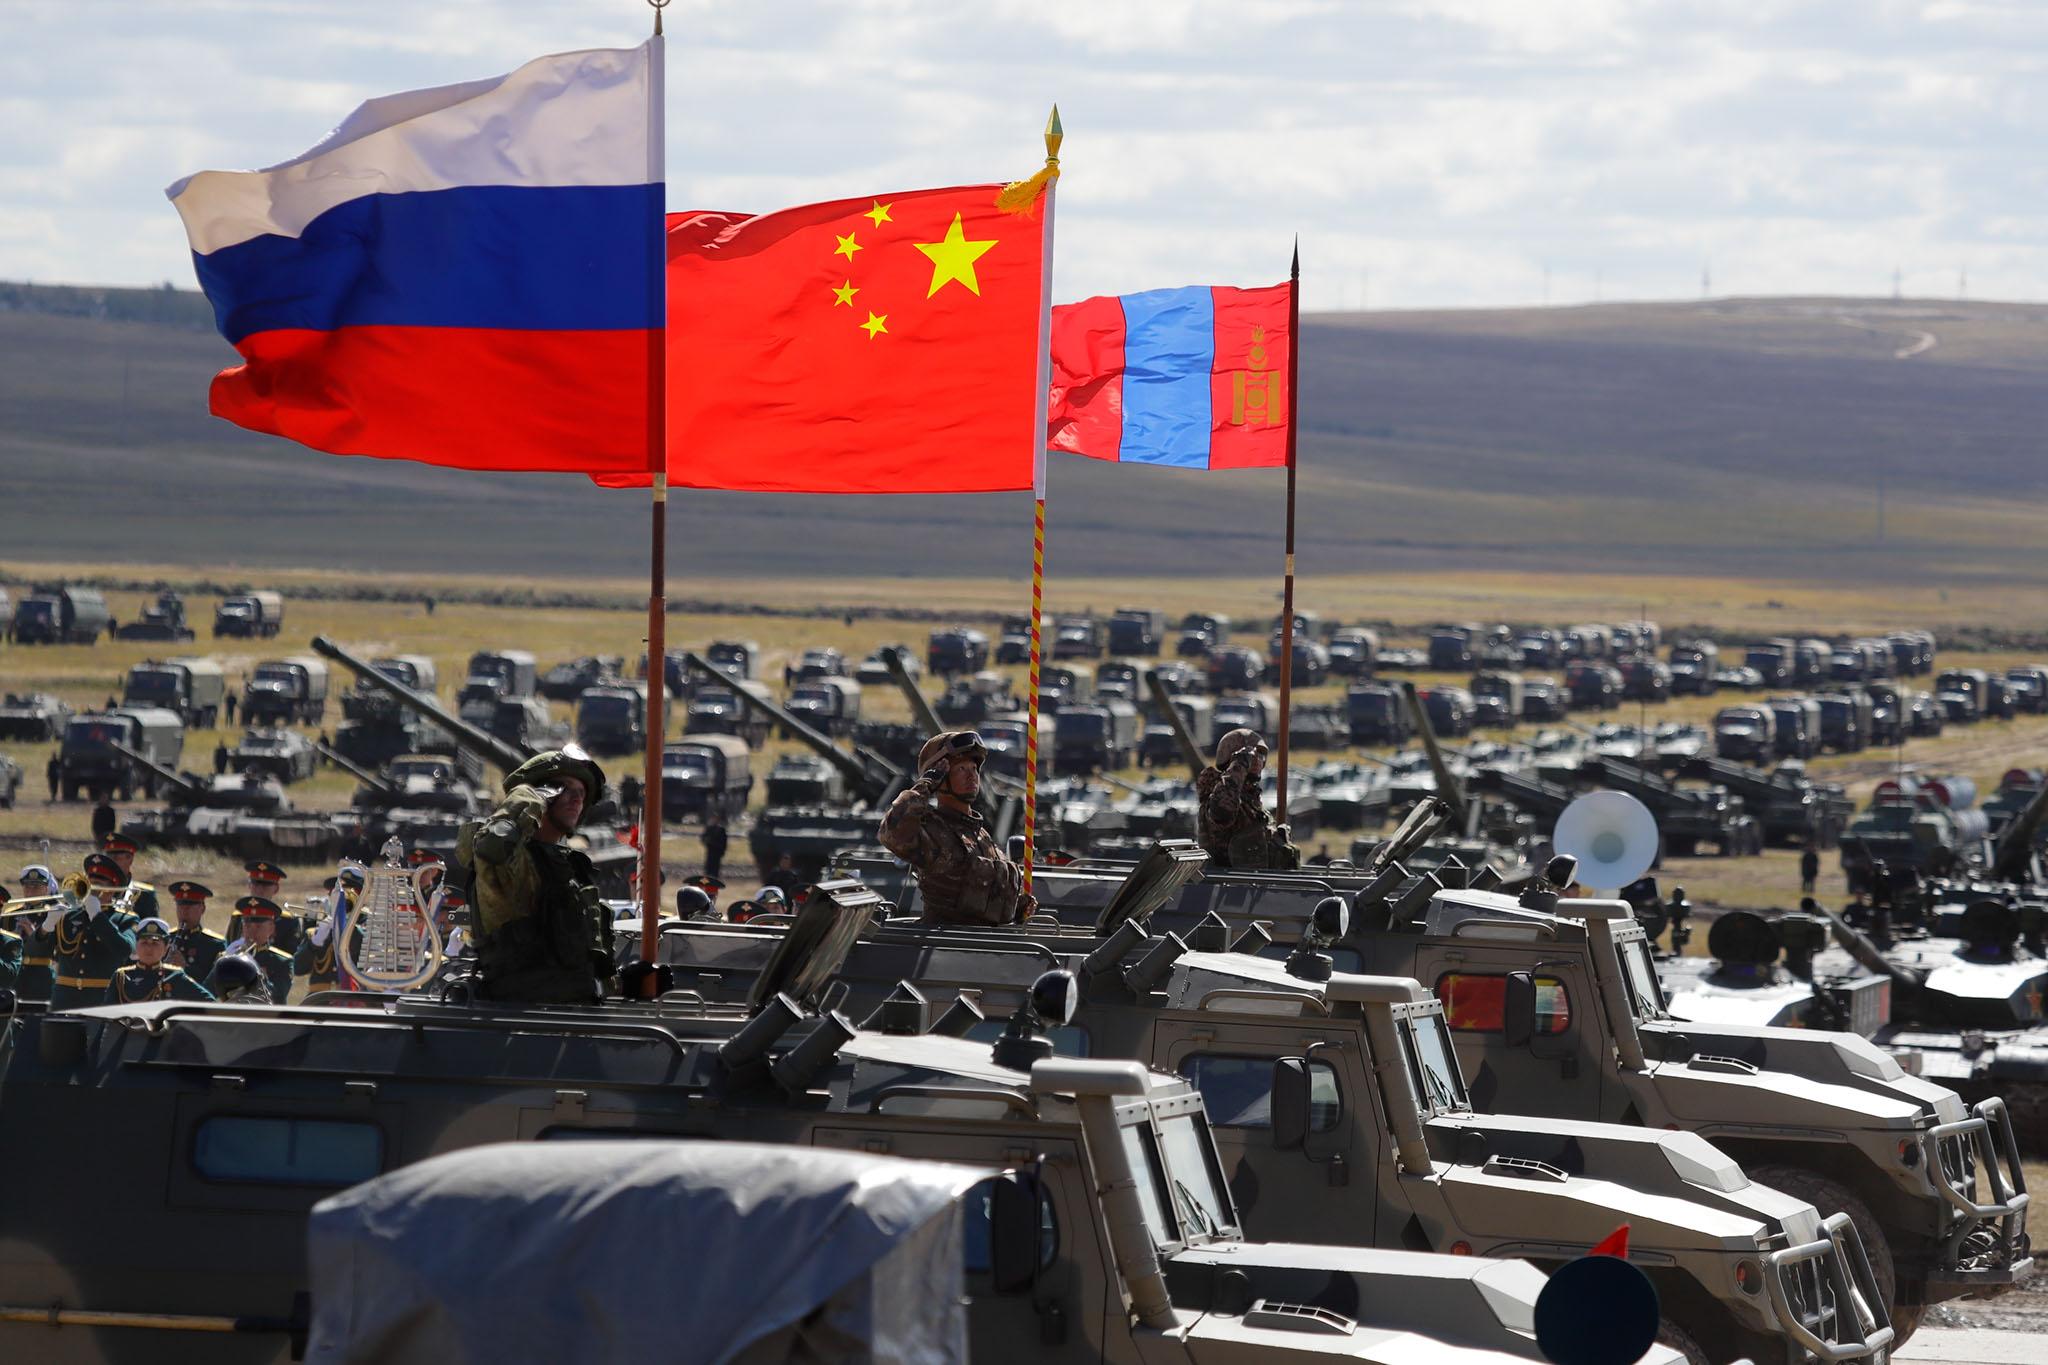 Russian, Chinese, and Mongolian troops gather at the end of the Vostok-2018 exercises